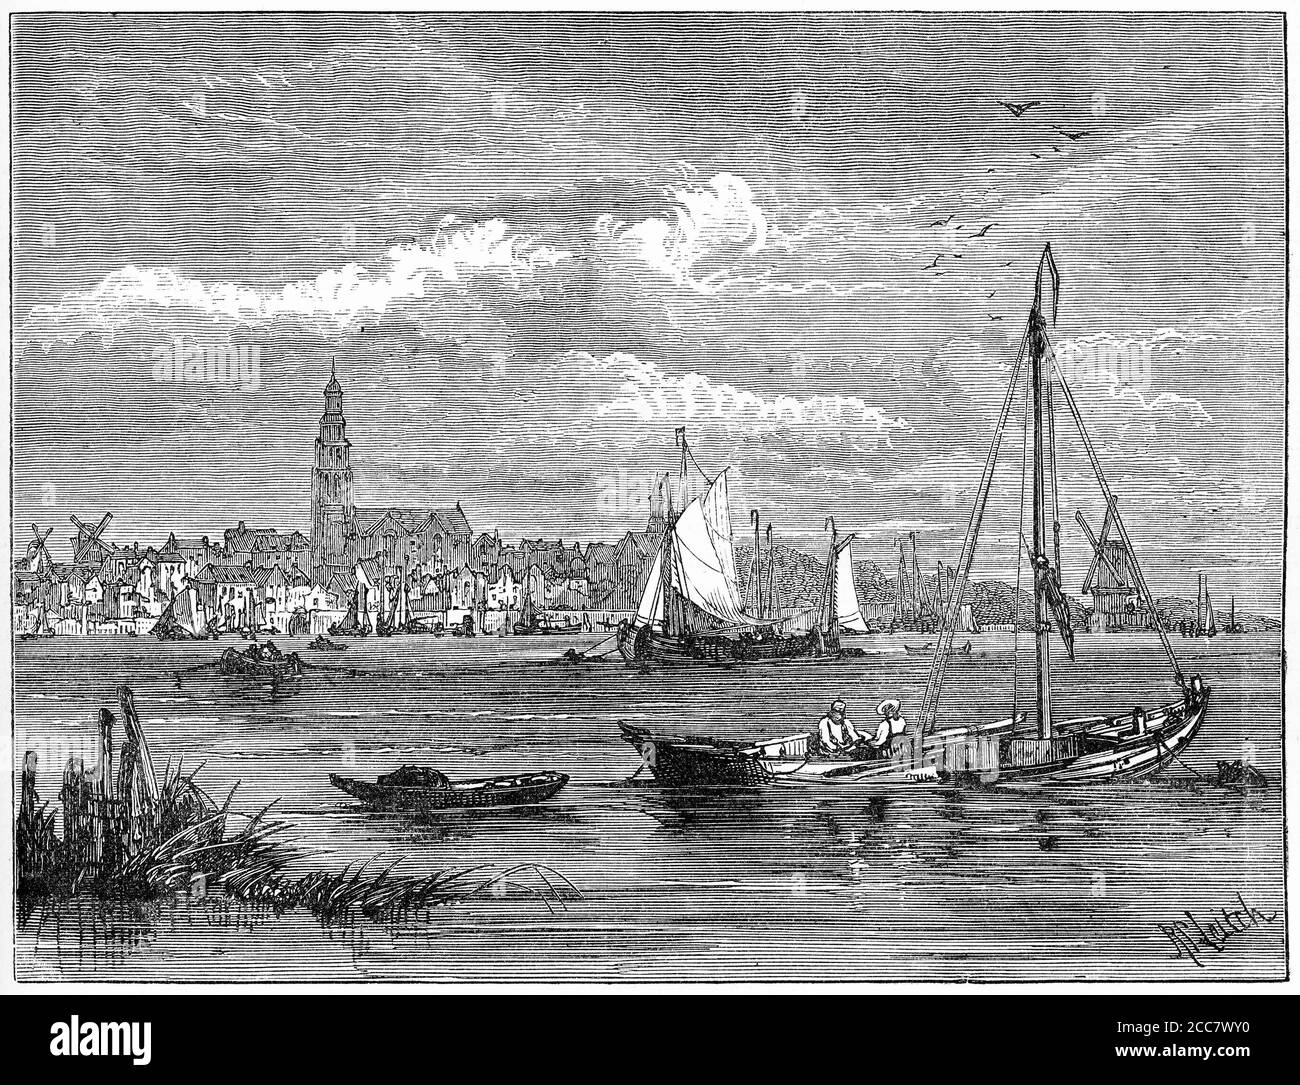 Engraving of Flushing in The Netherlands, circa 1570, illustration from 'The history of Protestantism' by James Aitken Wylie (1808-1890), pub. 1878 Stock Photo